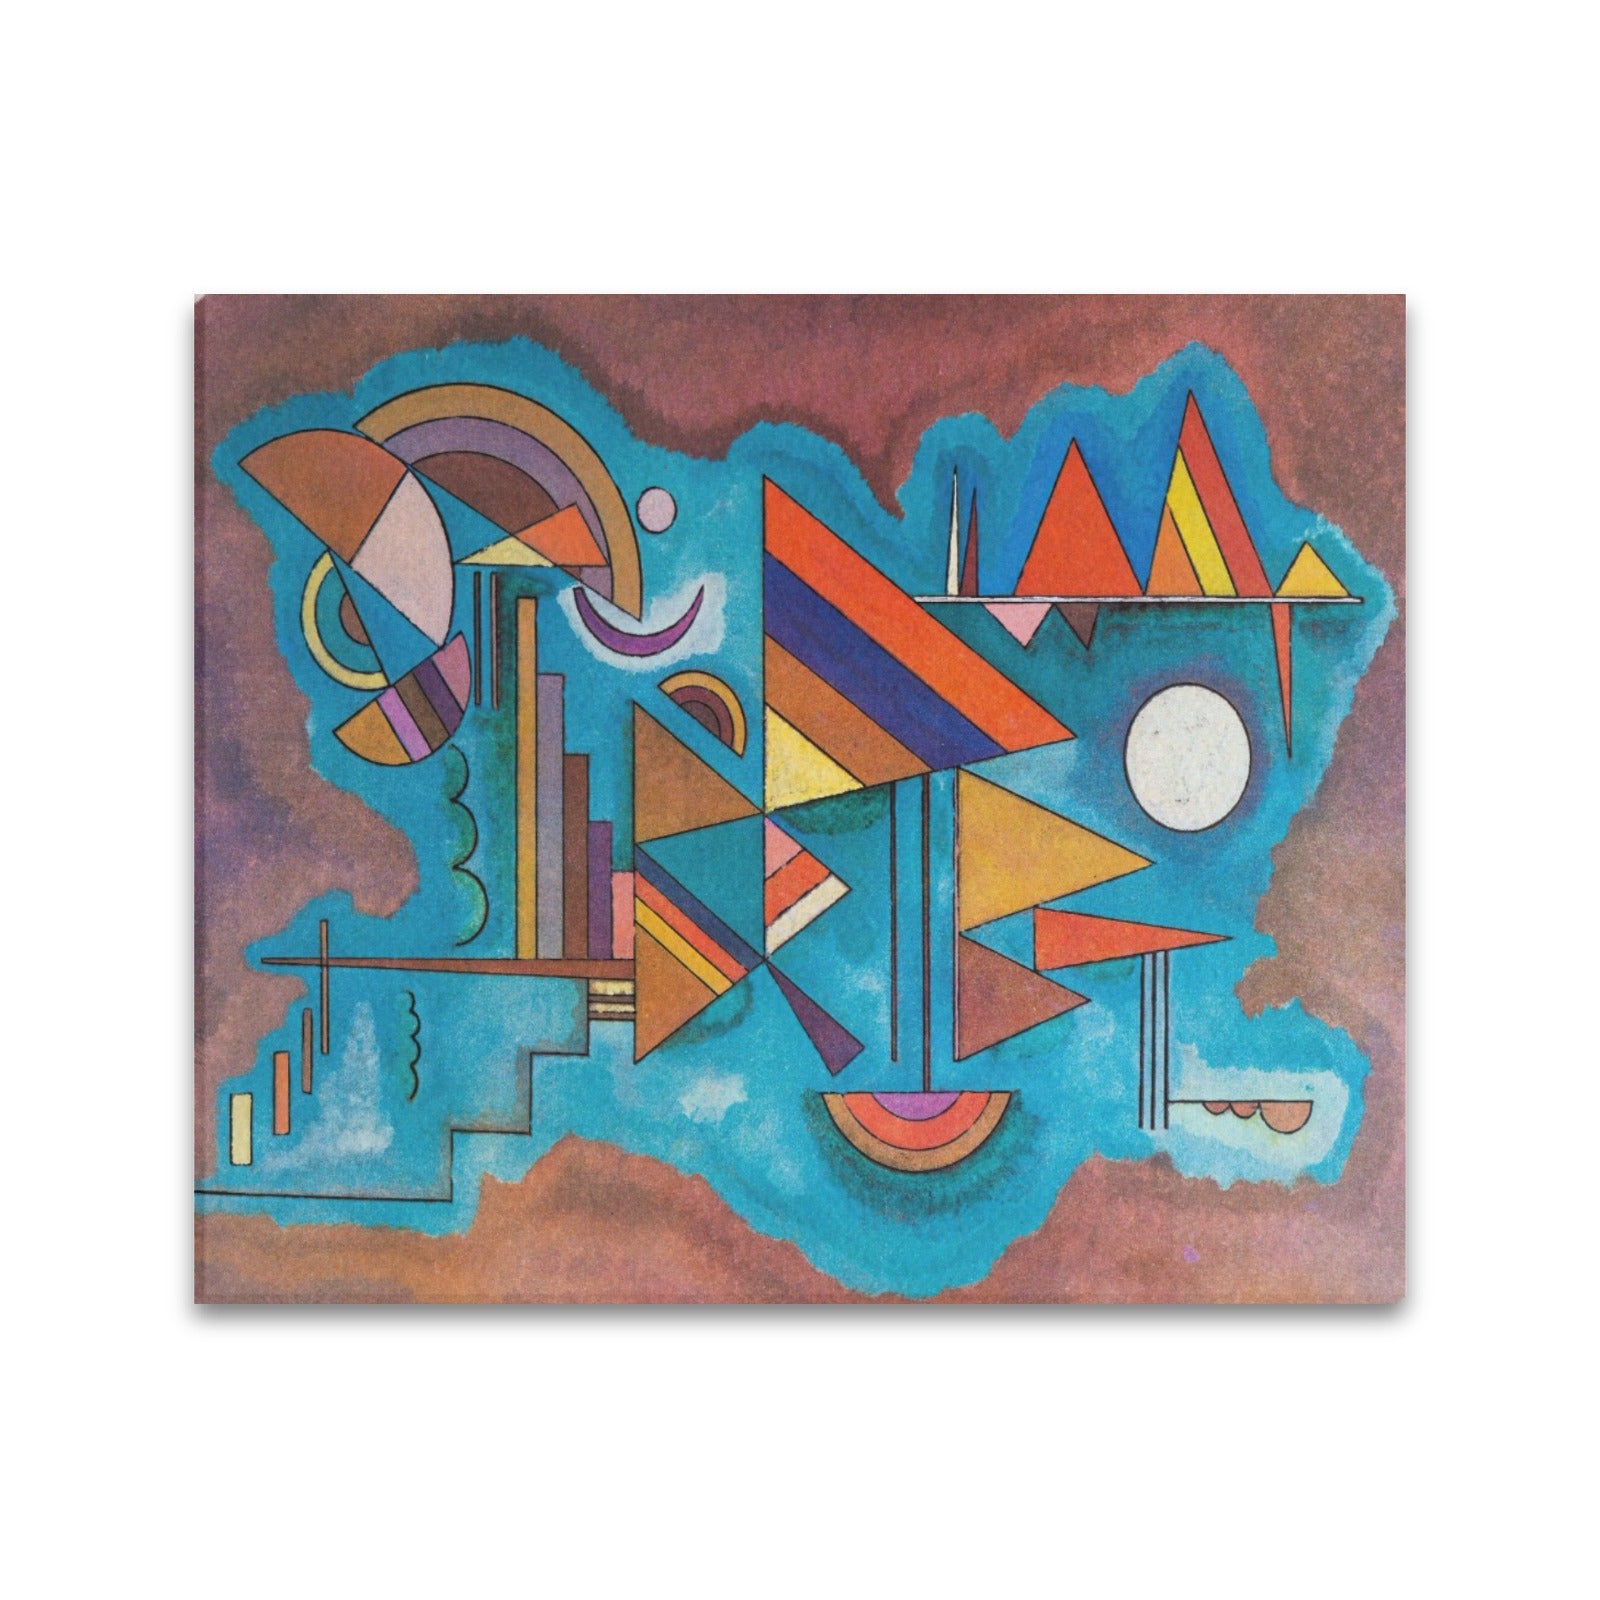 WASSILY KANDINSKY - STANDING (1930) - WRAPPED CANVAS PRINT 20" x 24"